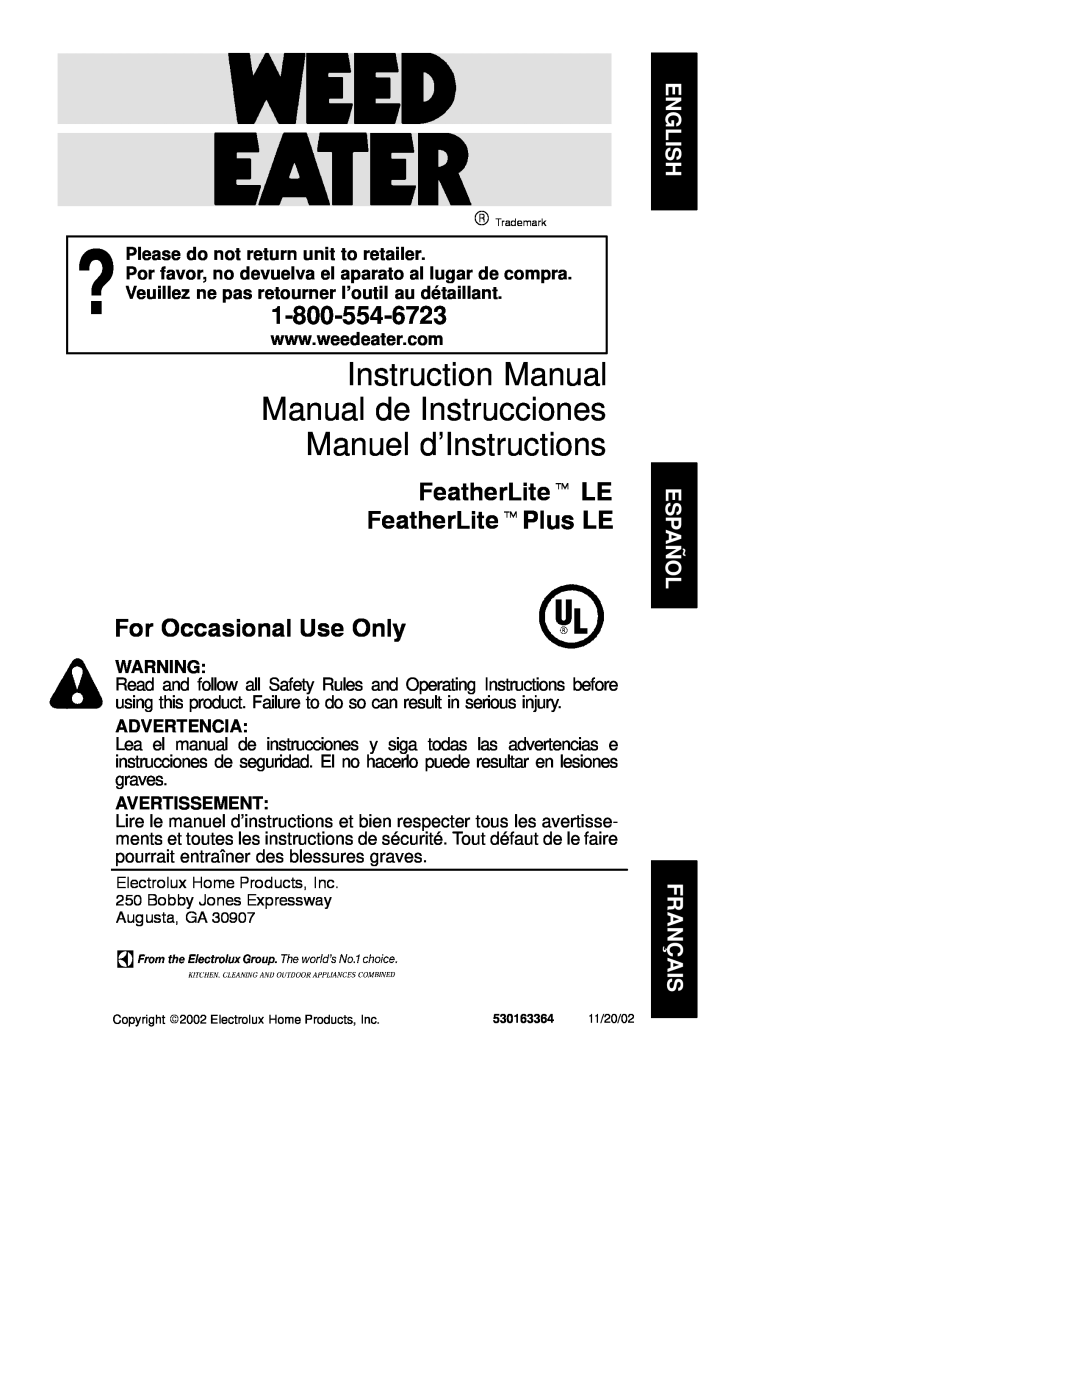 Weed Eater 530163364 instruction manual Please do not return unit to retailer, Advertencia, Avertissement 